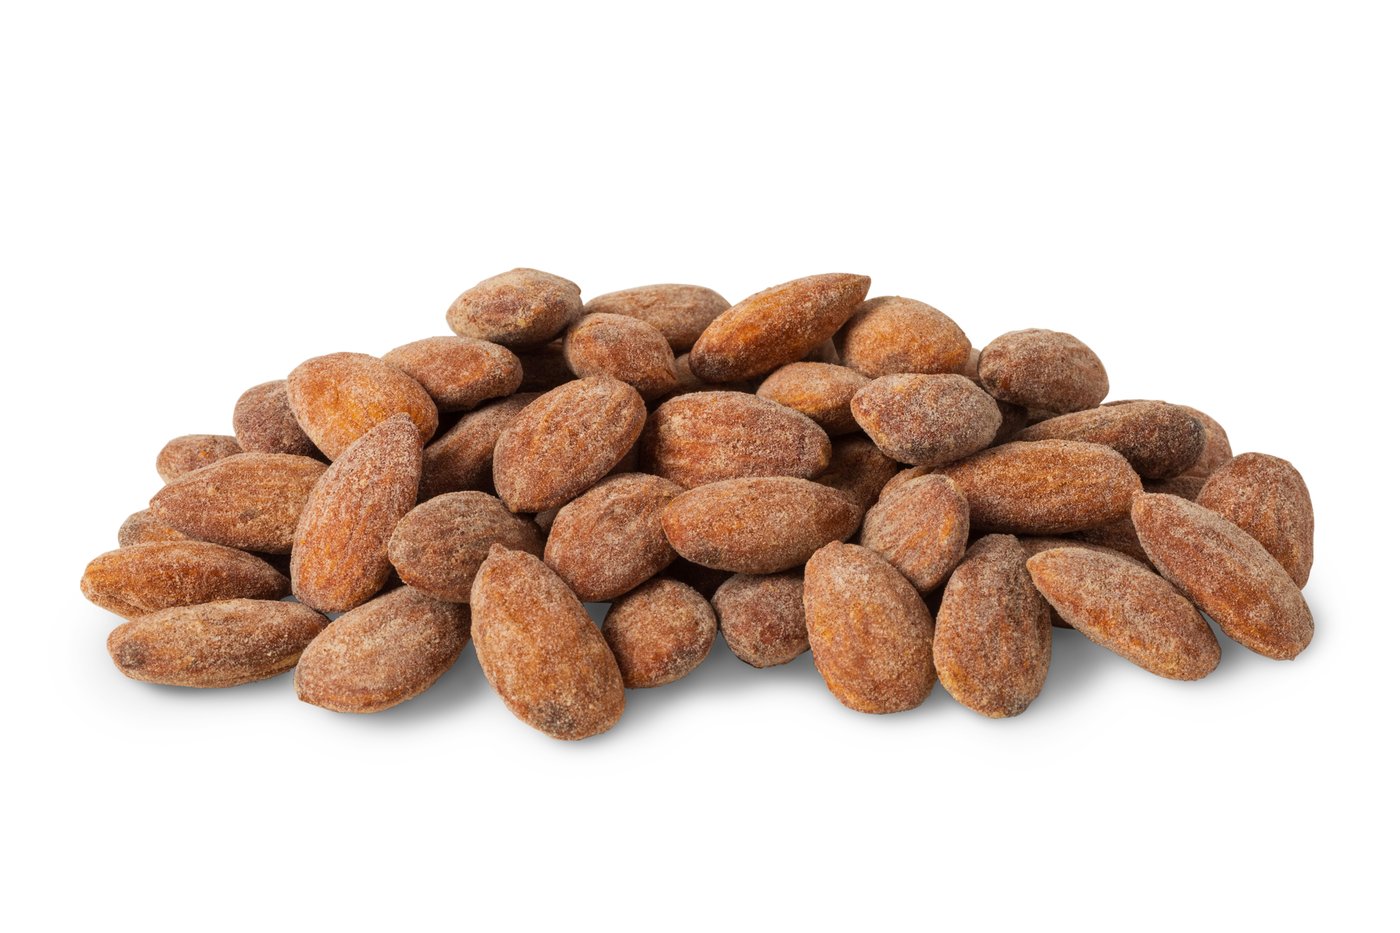 Tequila Lime Almonds image zoom